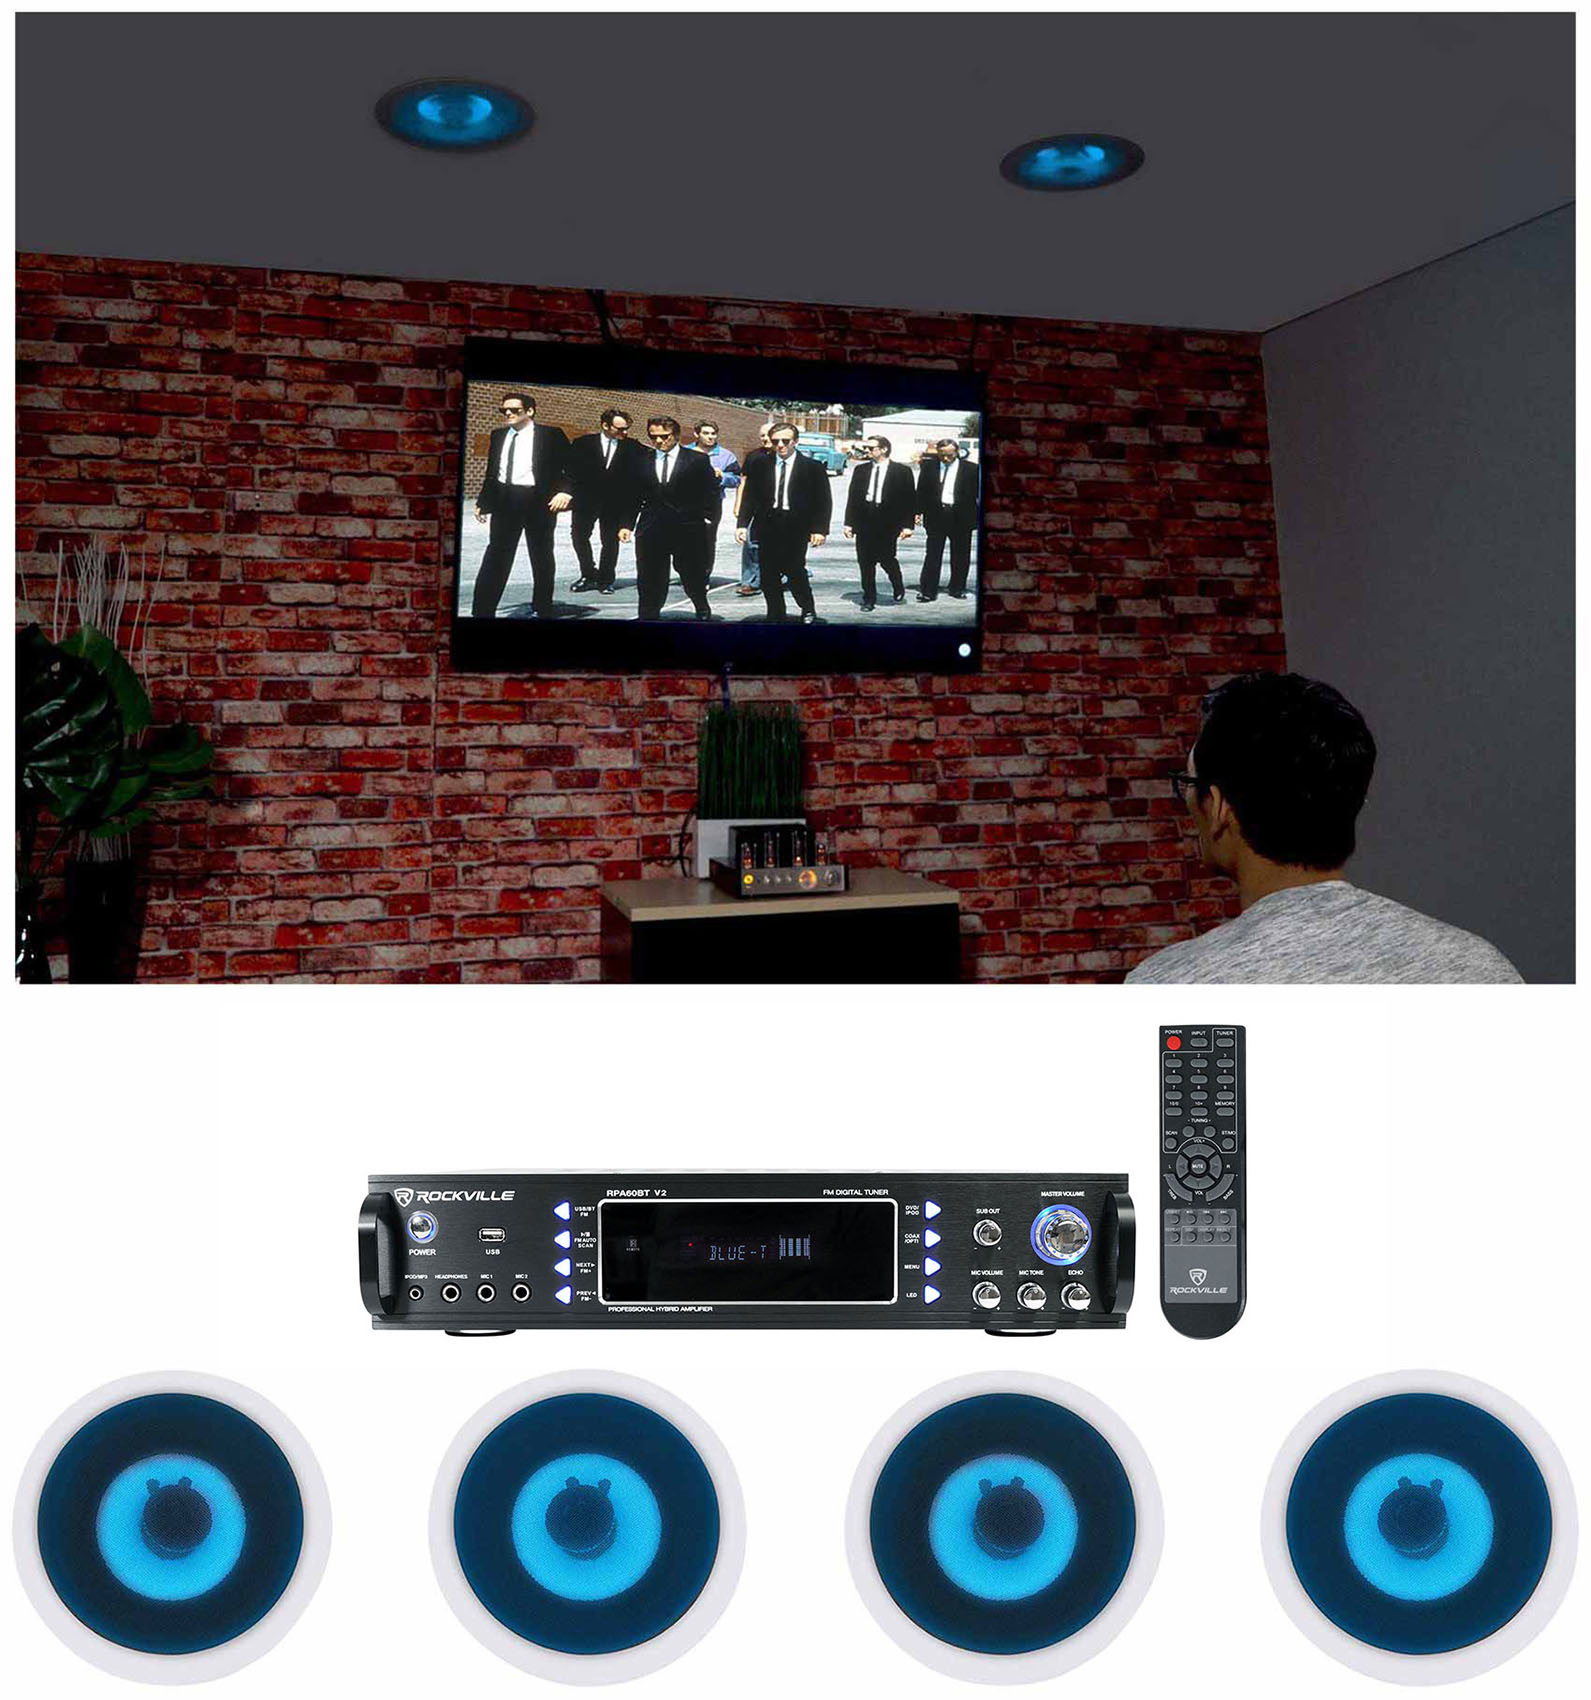 Rockville Home Theater Bluetooth Receiver+(4) In-Ceiling 8" Blue LED Speakers - image 1 of 12